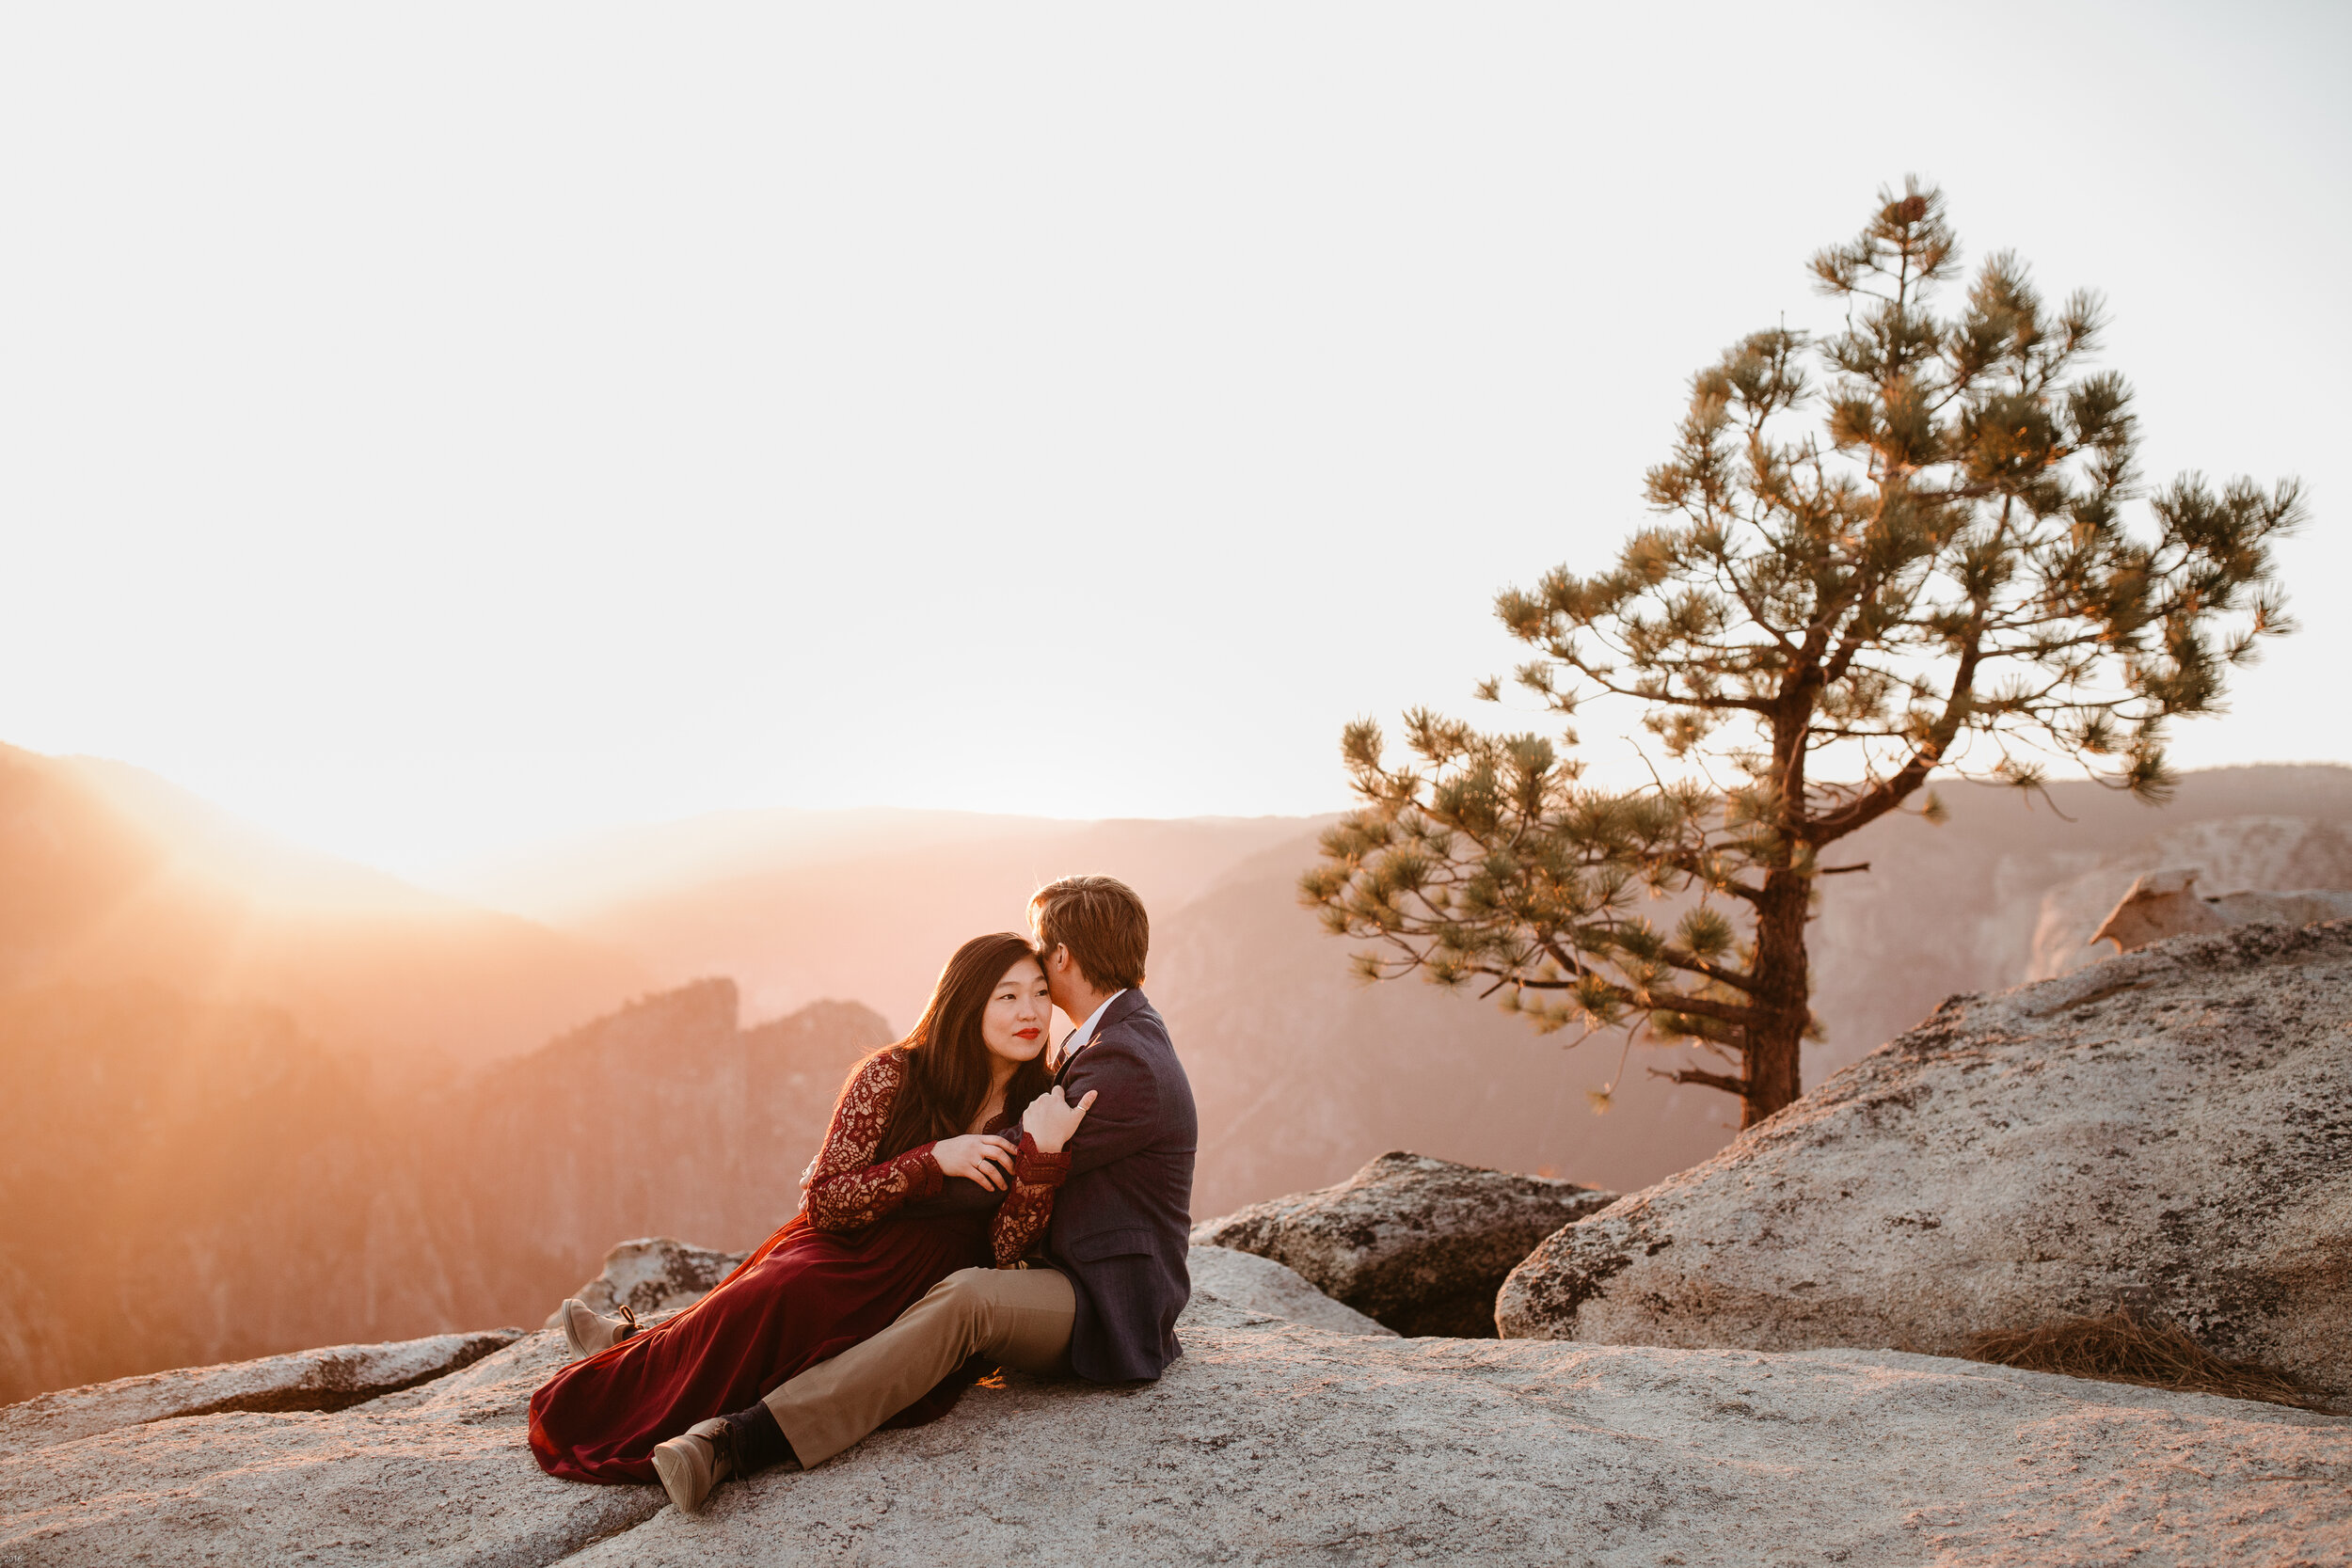 yosemite-national-park-couples-session-at-taft-point-and-yosemite-valley-yosemite-elopement-photographer-nicole-daacke-photography-160.jpg